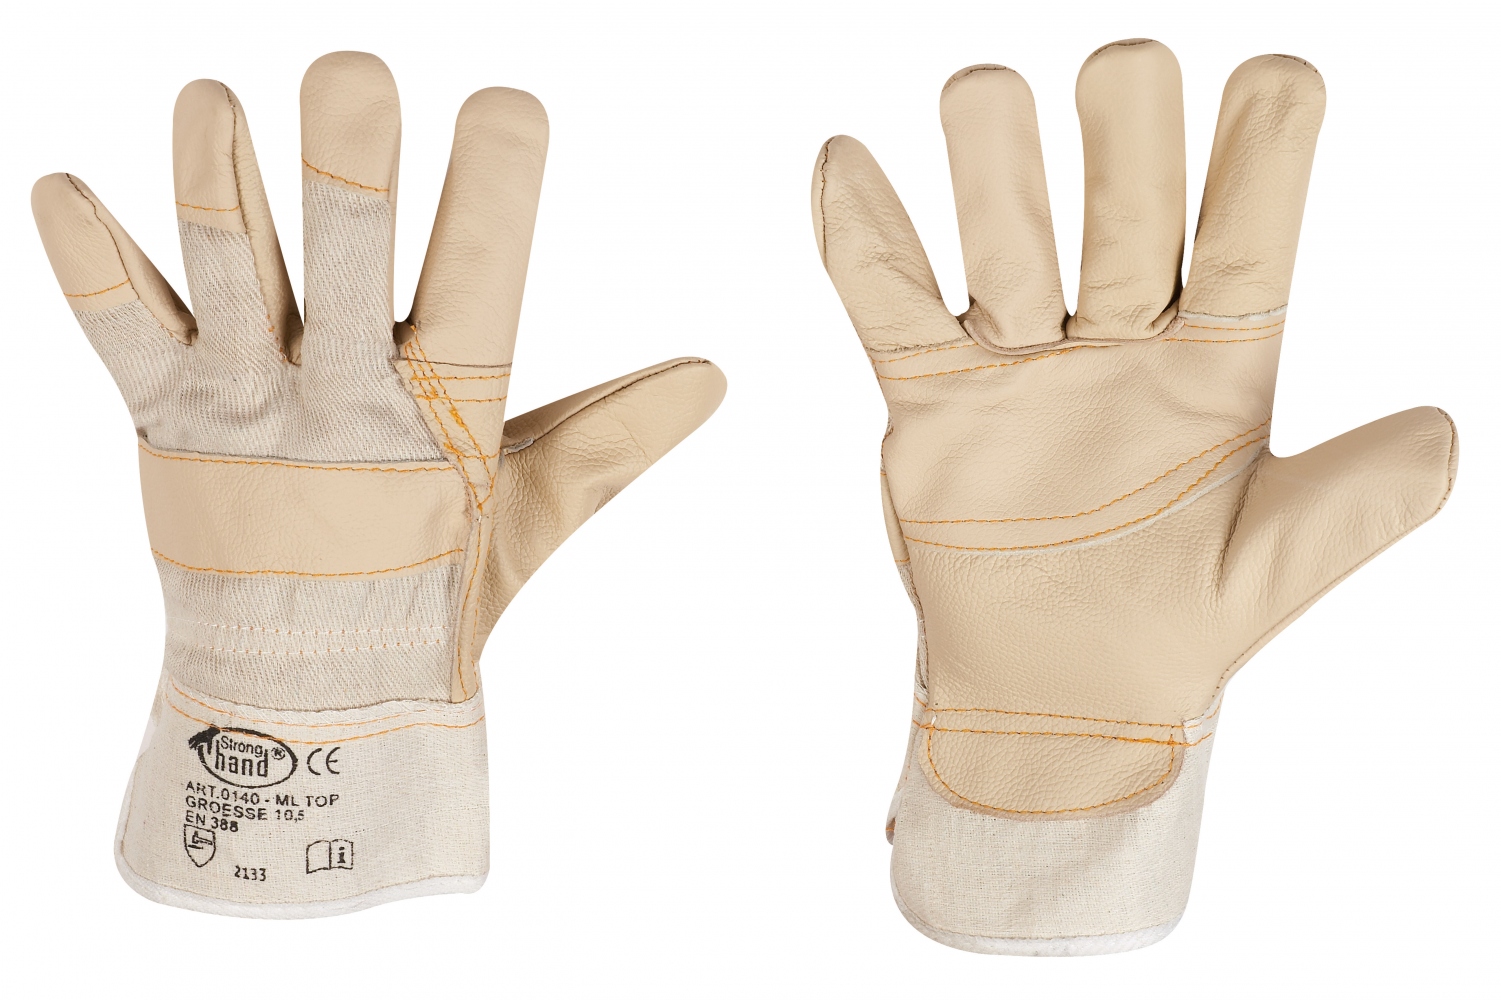 Various safety gloves